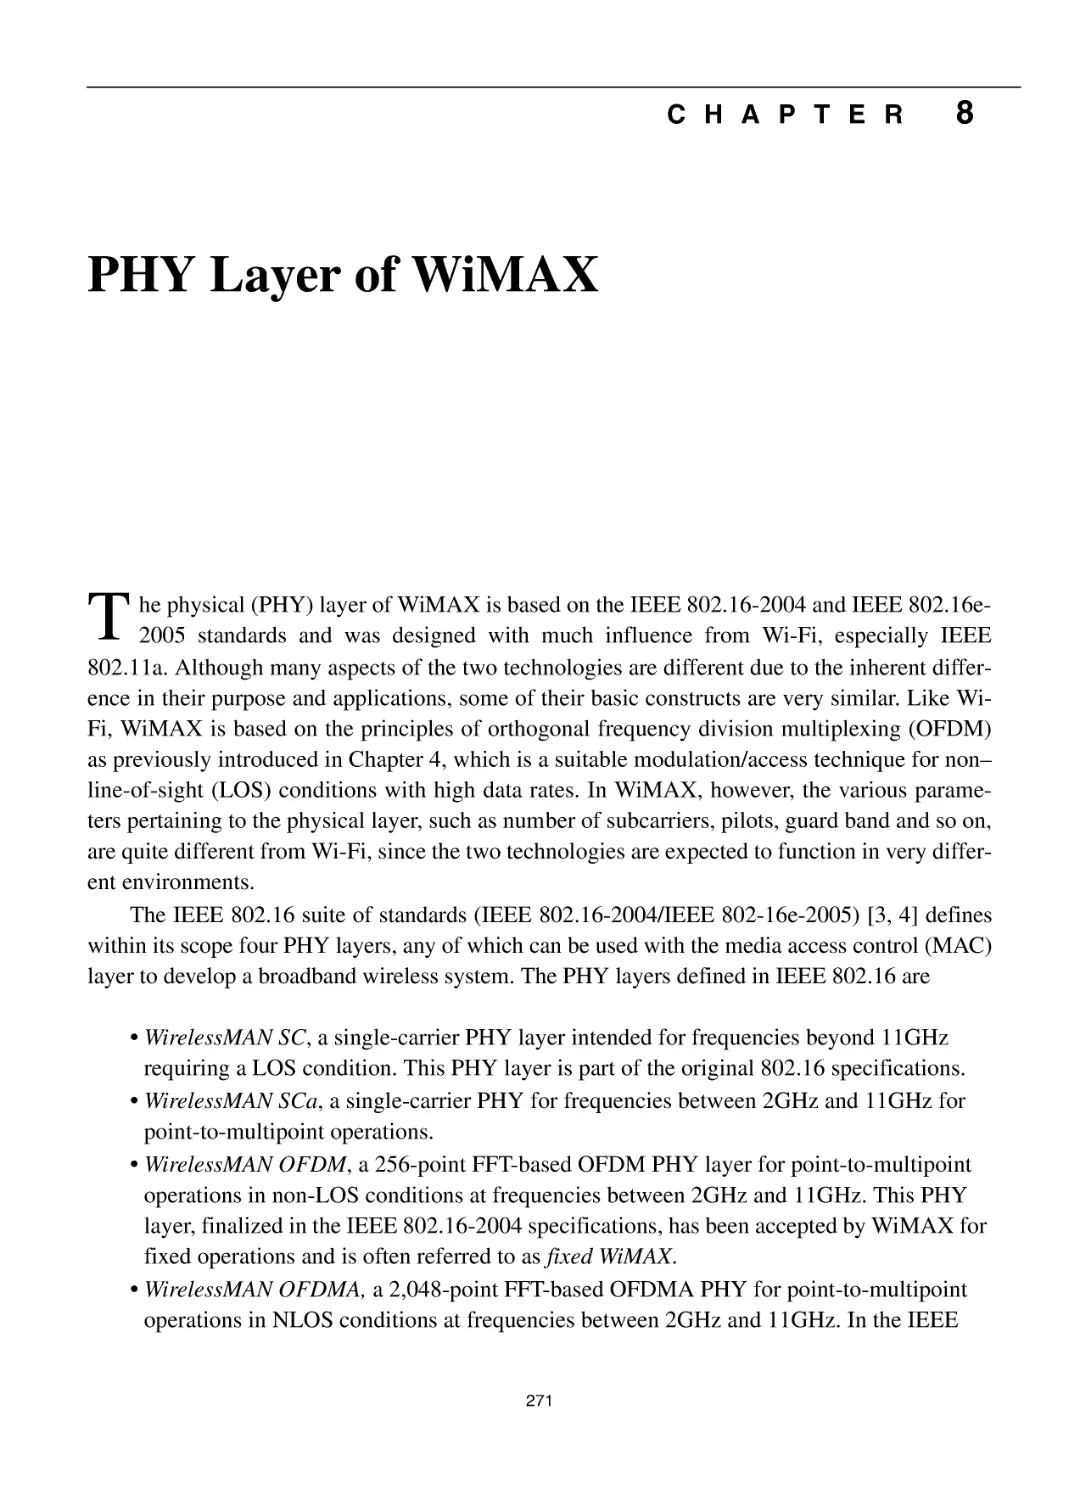 Chapter 8 PHY Layer of WiMAX